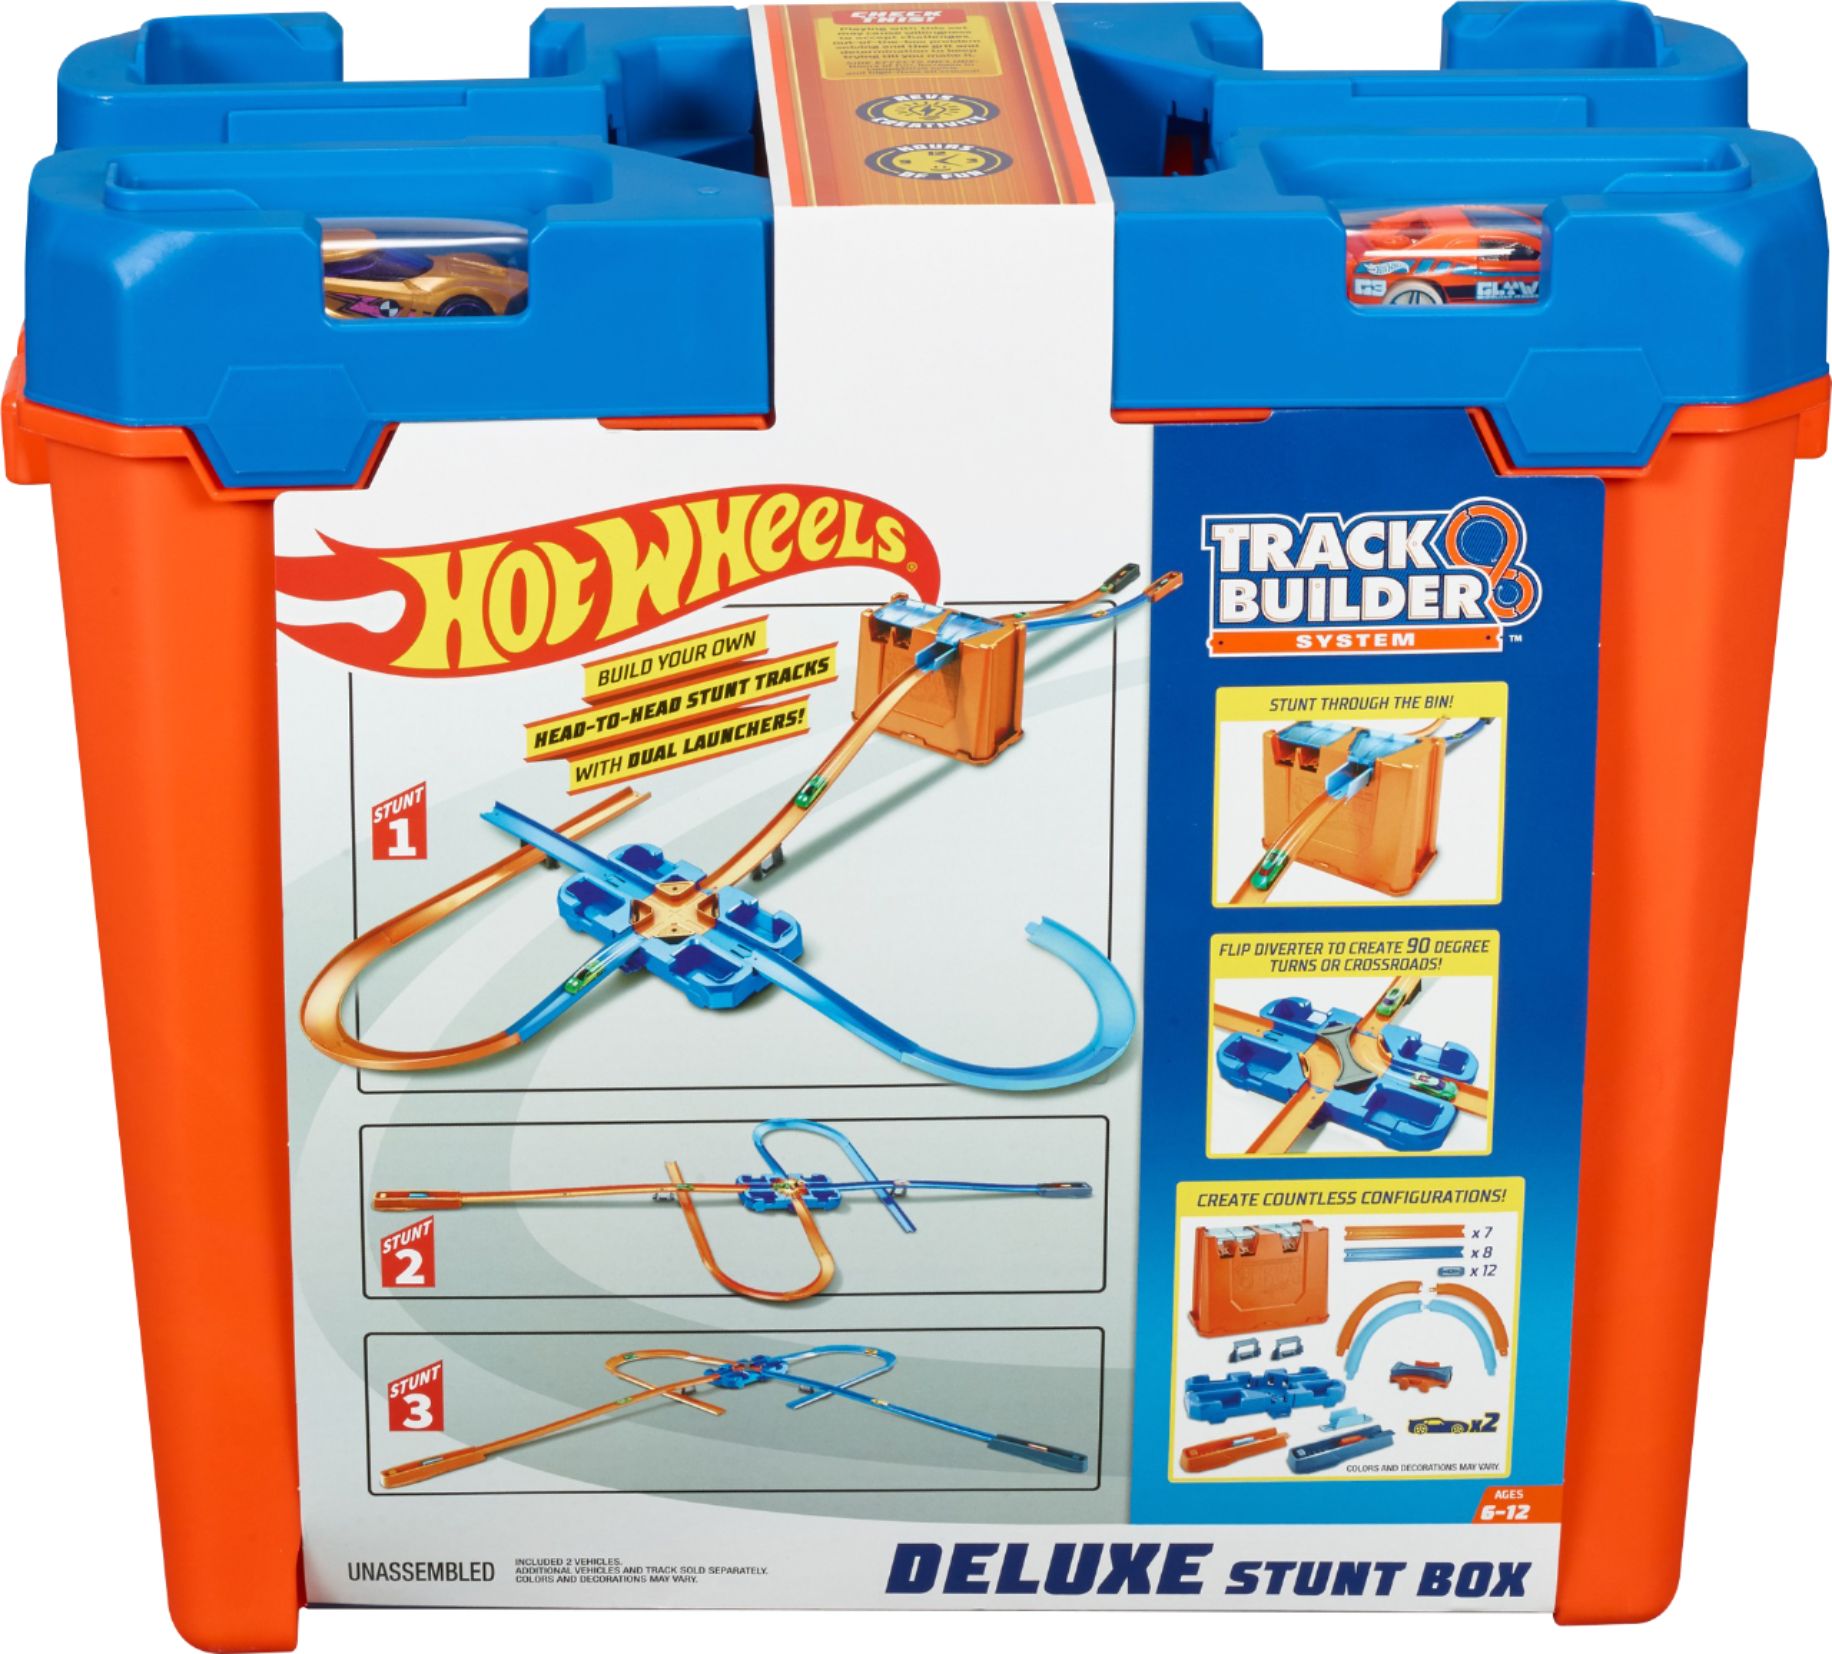 New Hot Wheels track lot of 12 pieces 12 inch long with connectors 